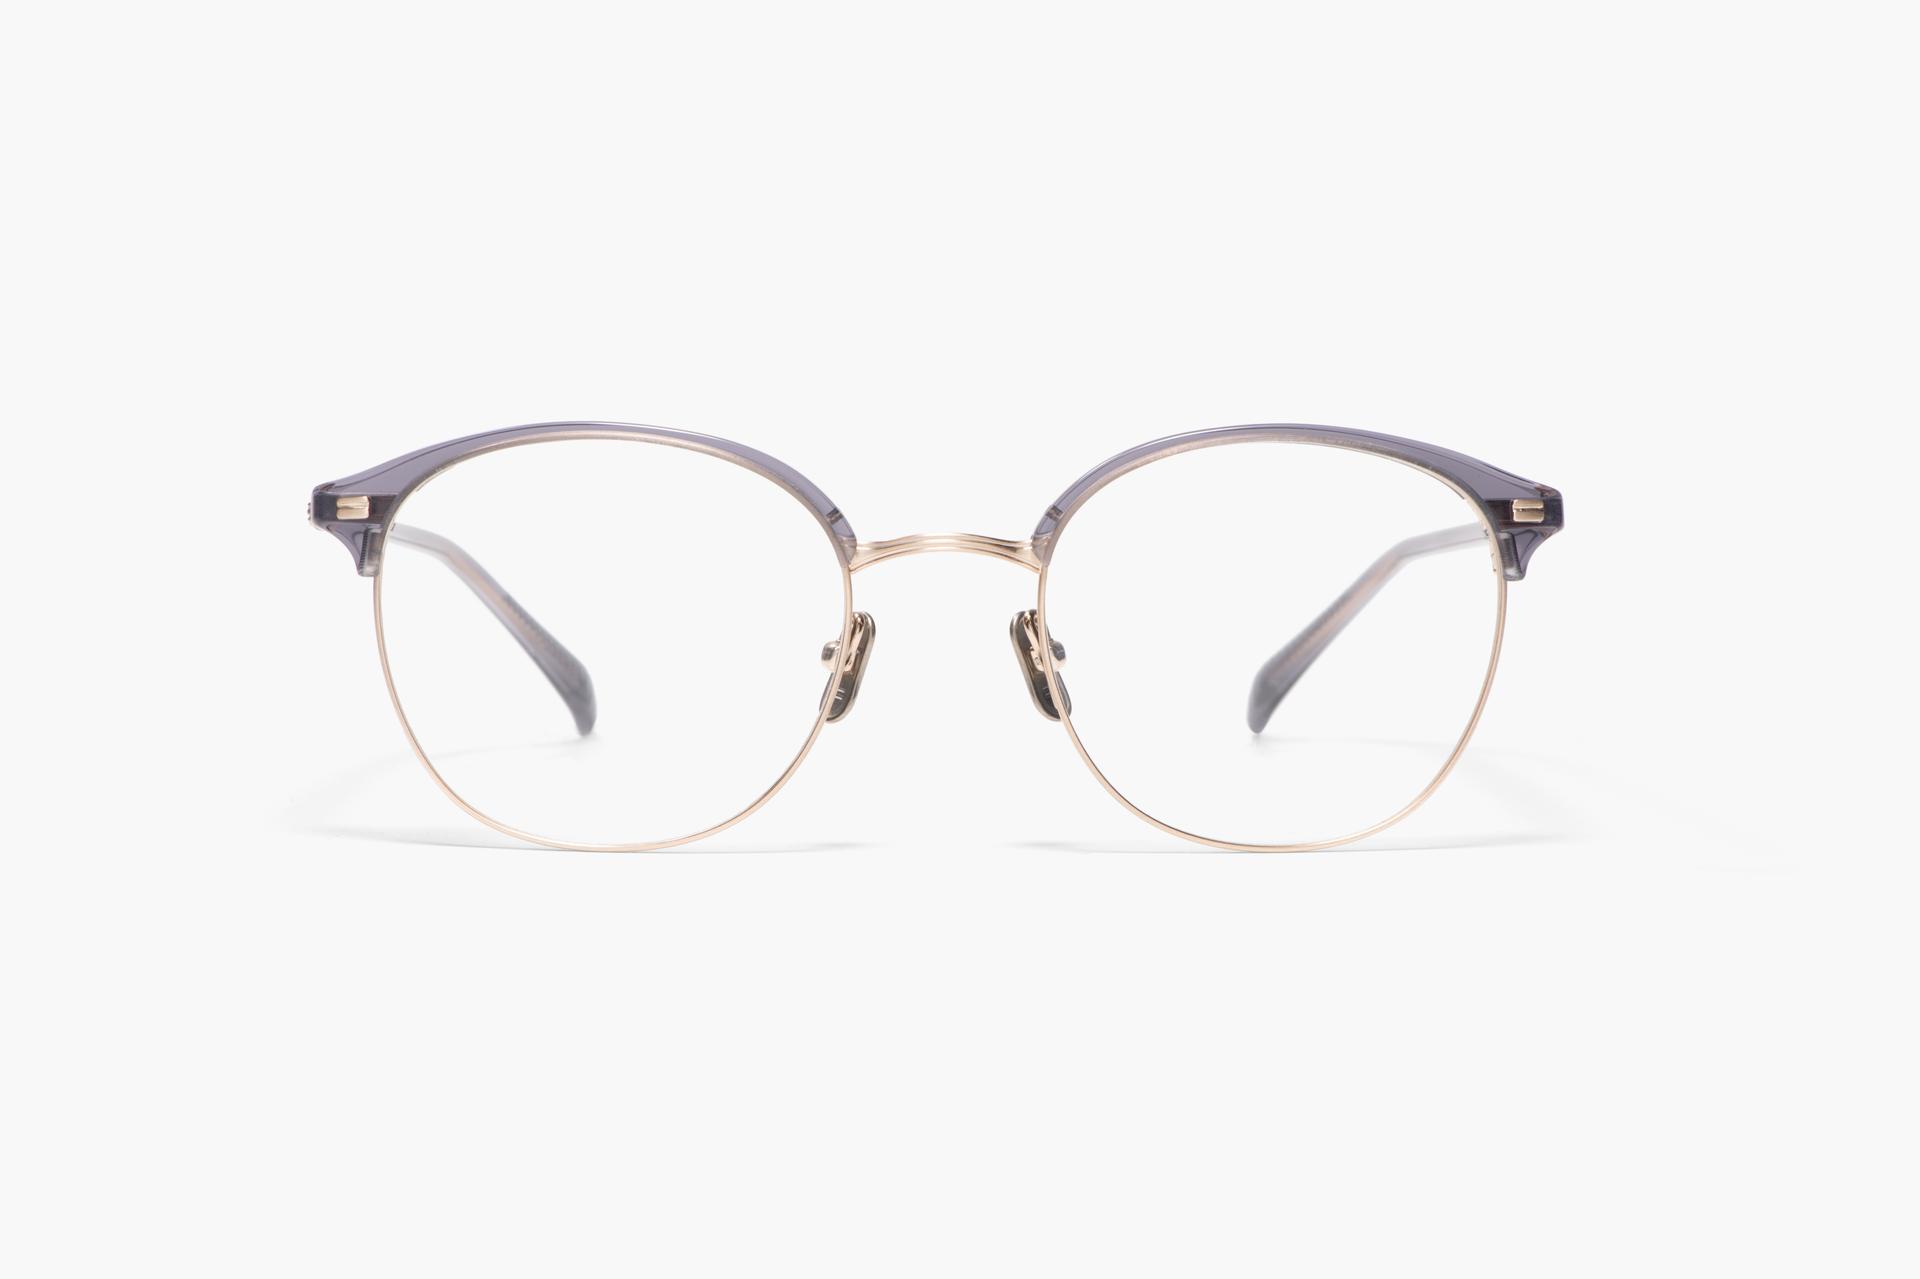 FA6177 by FRANK CUSTOM, Try on glasses online & find optician